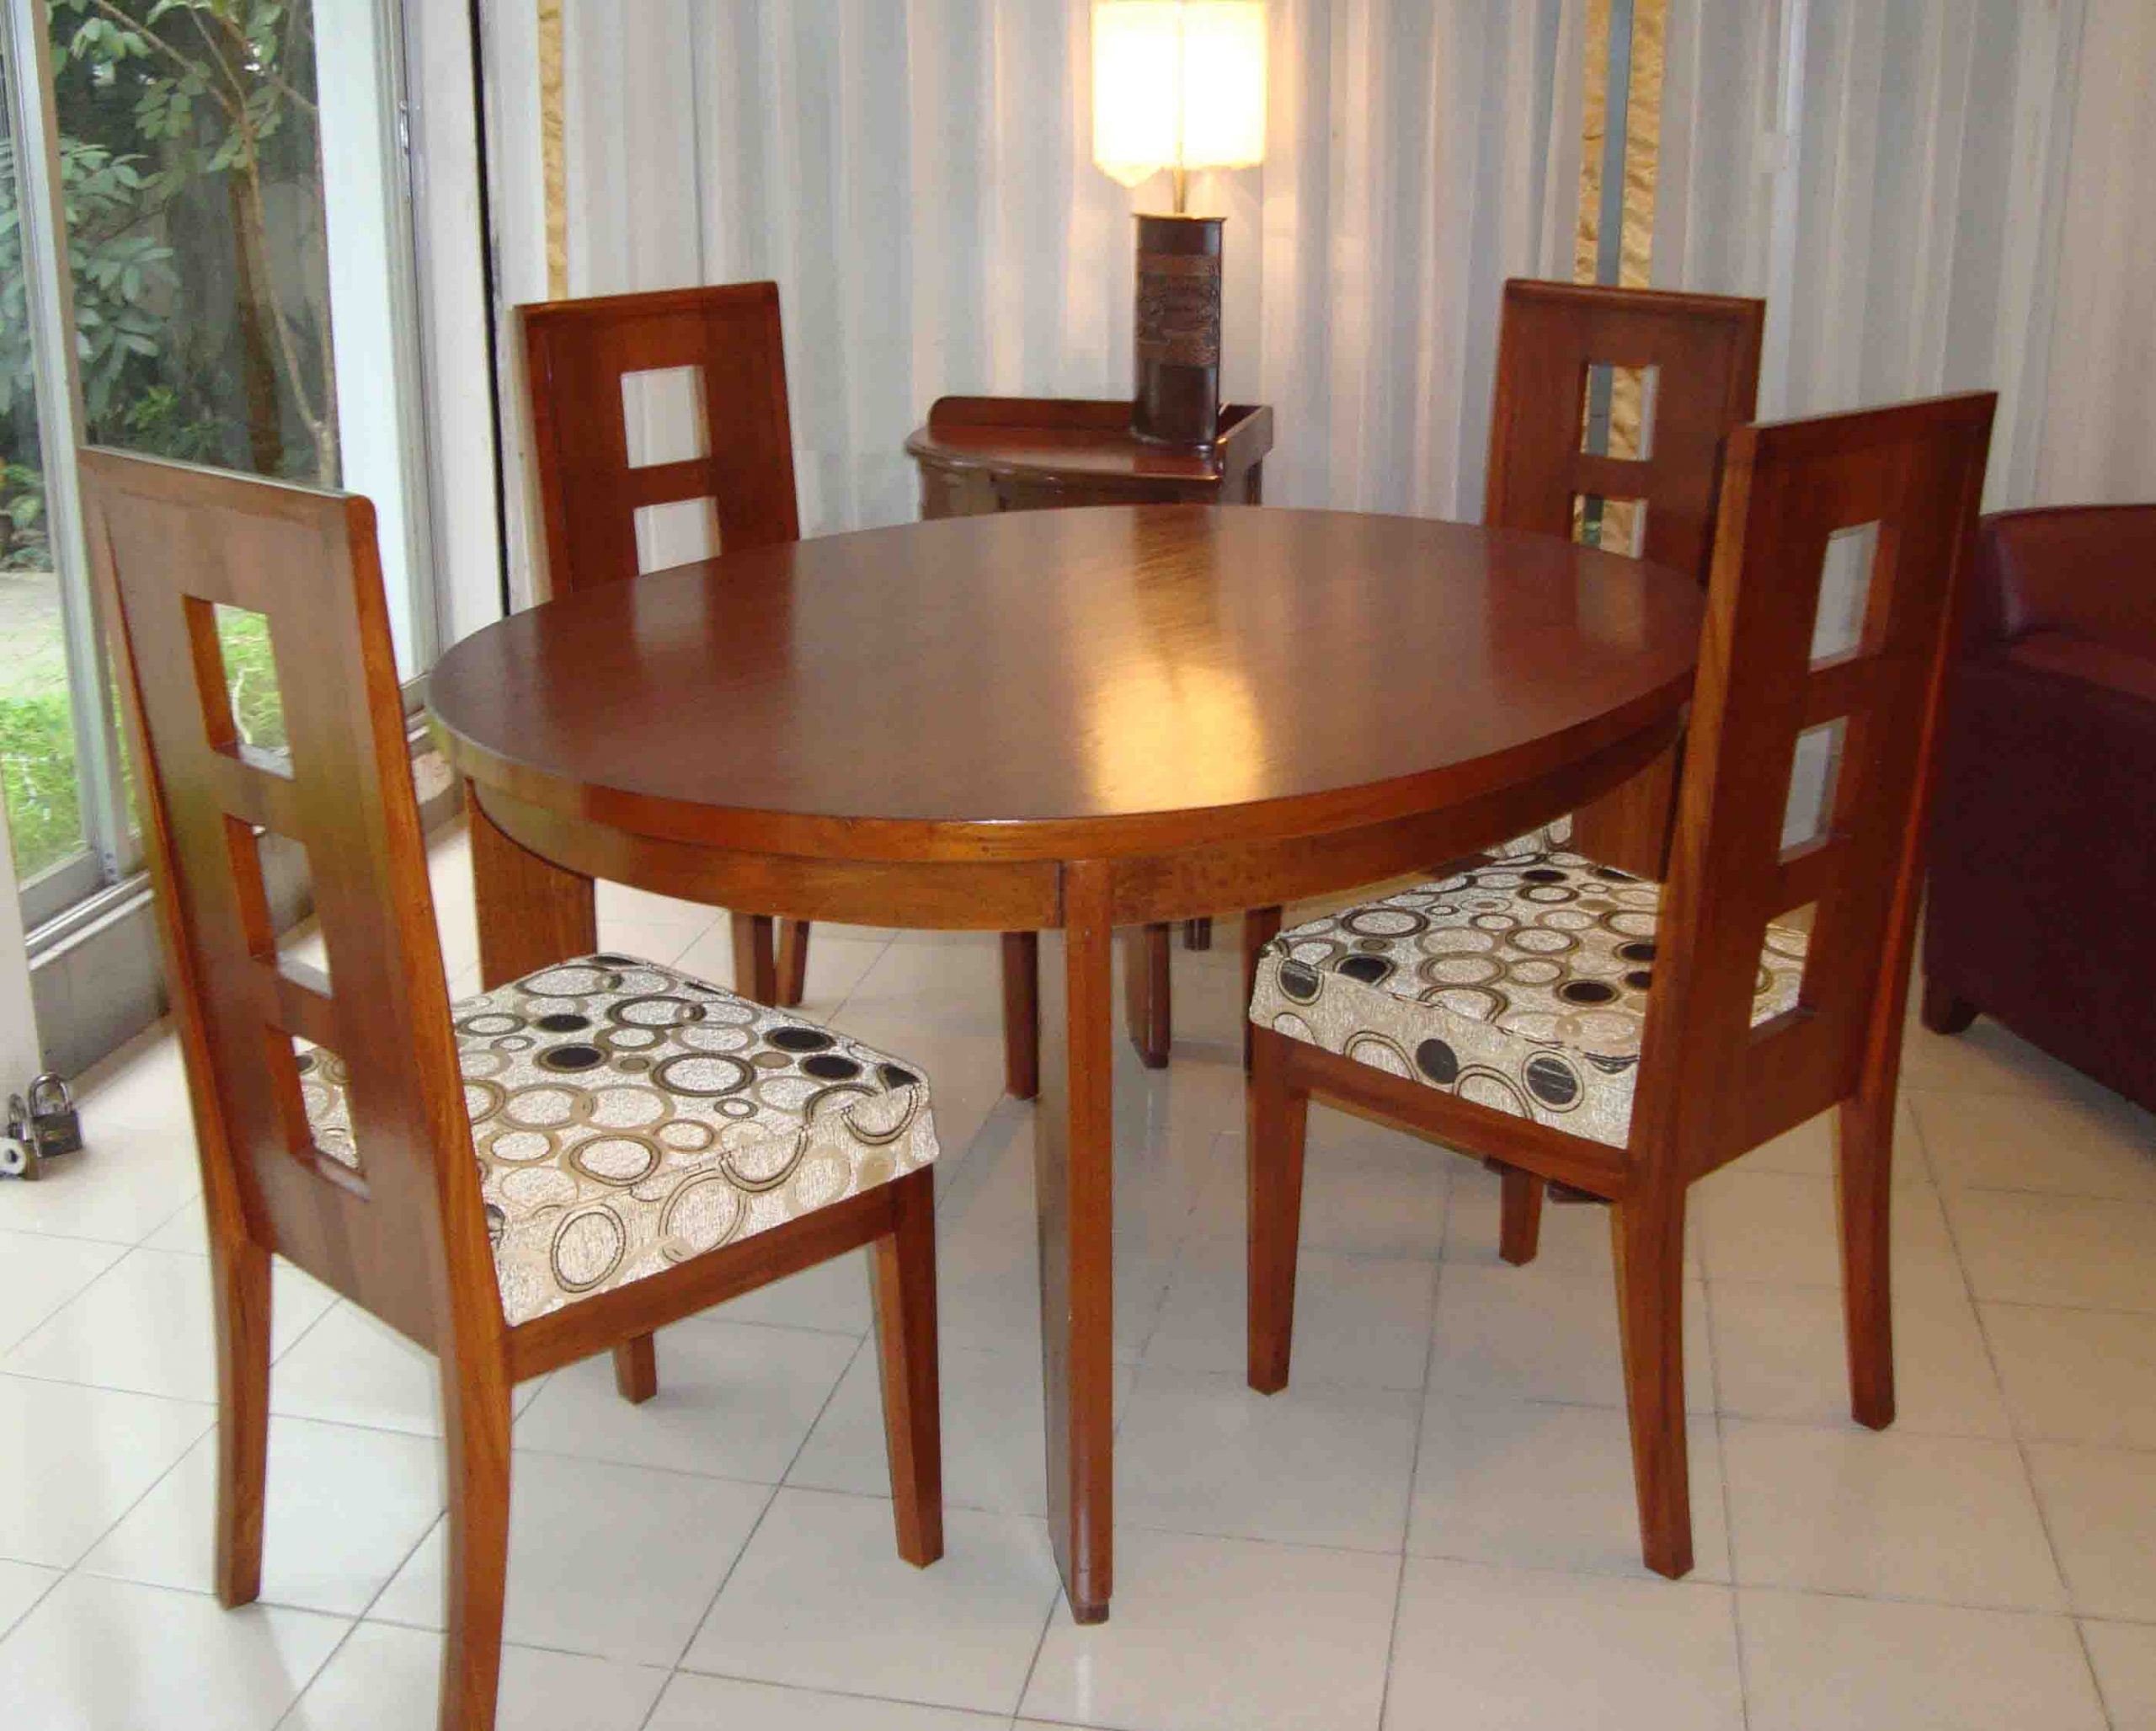 Nza Dining Table With 4 Chairs Made Of Solid Wood Clickbd for sizing 2796 X 2244